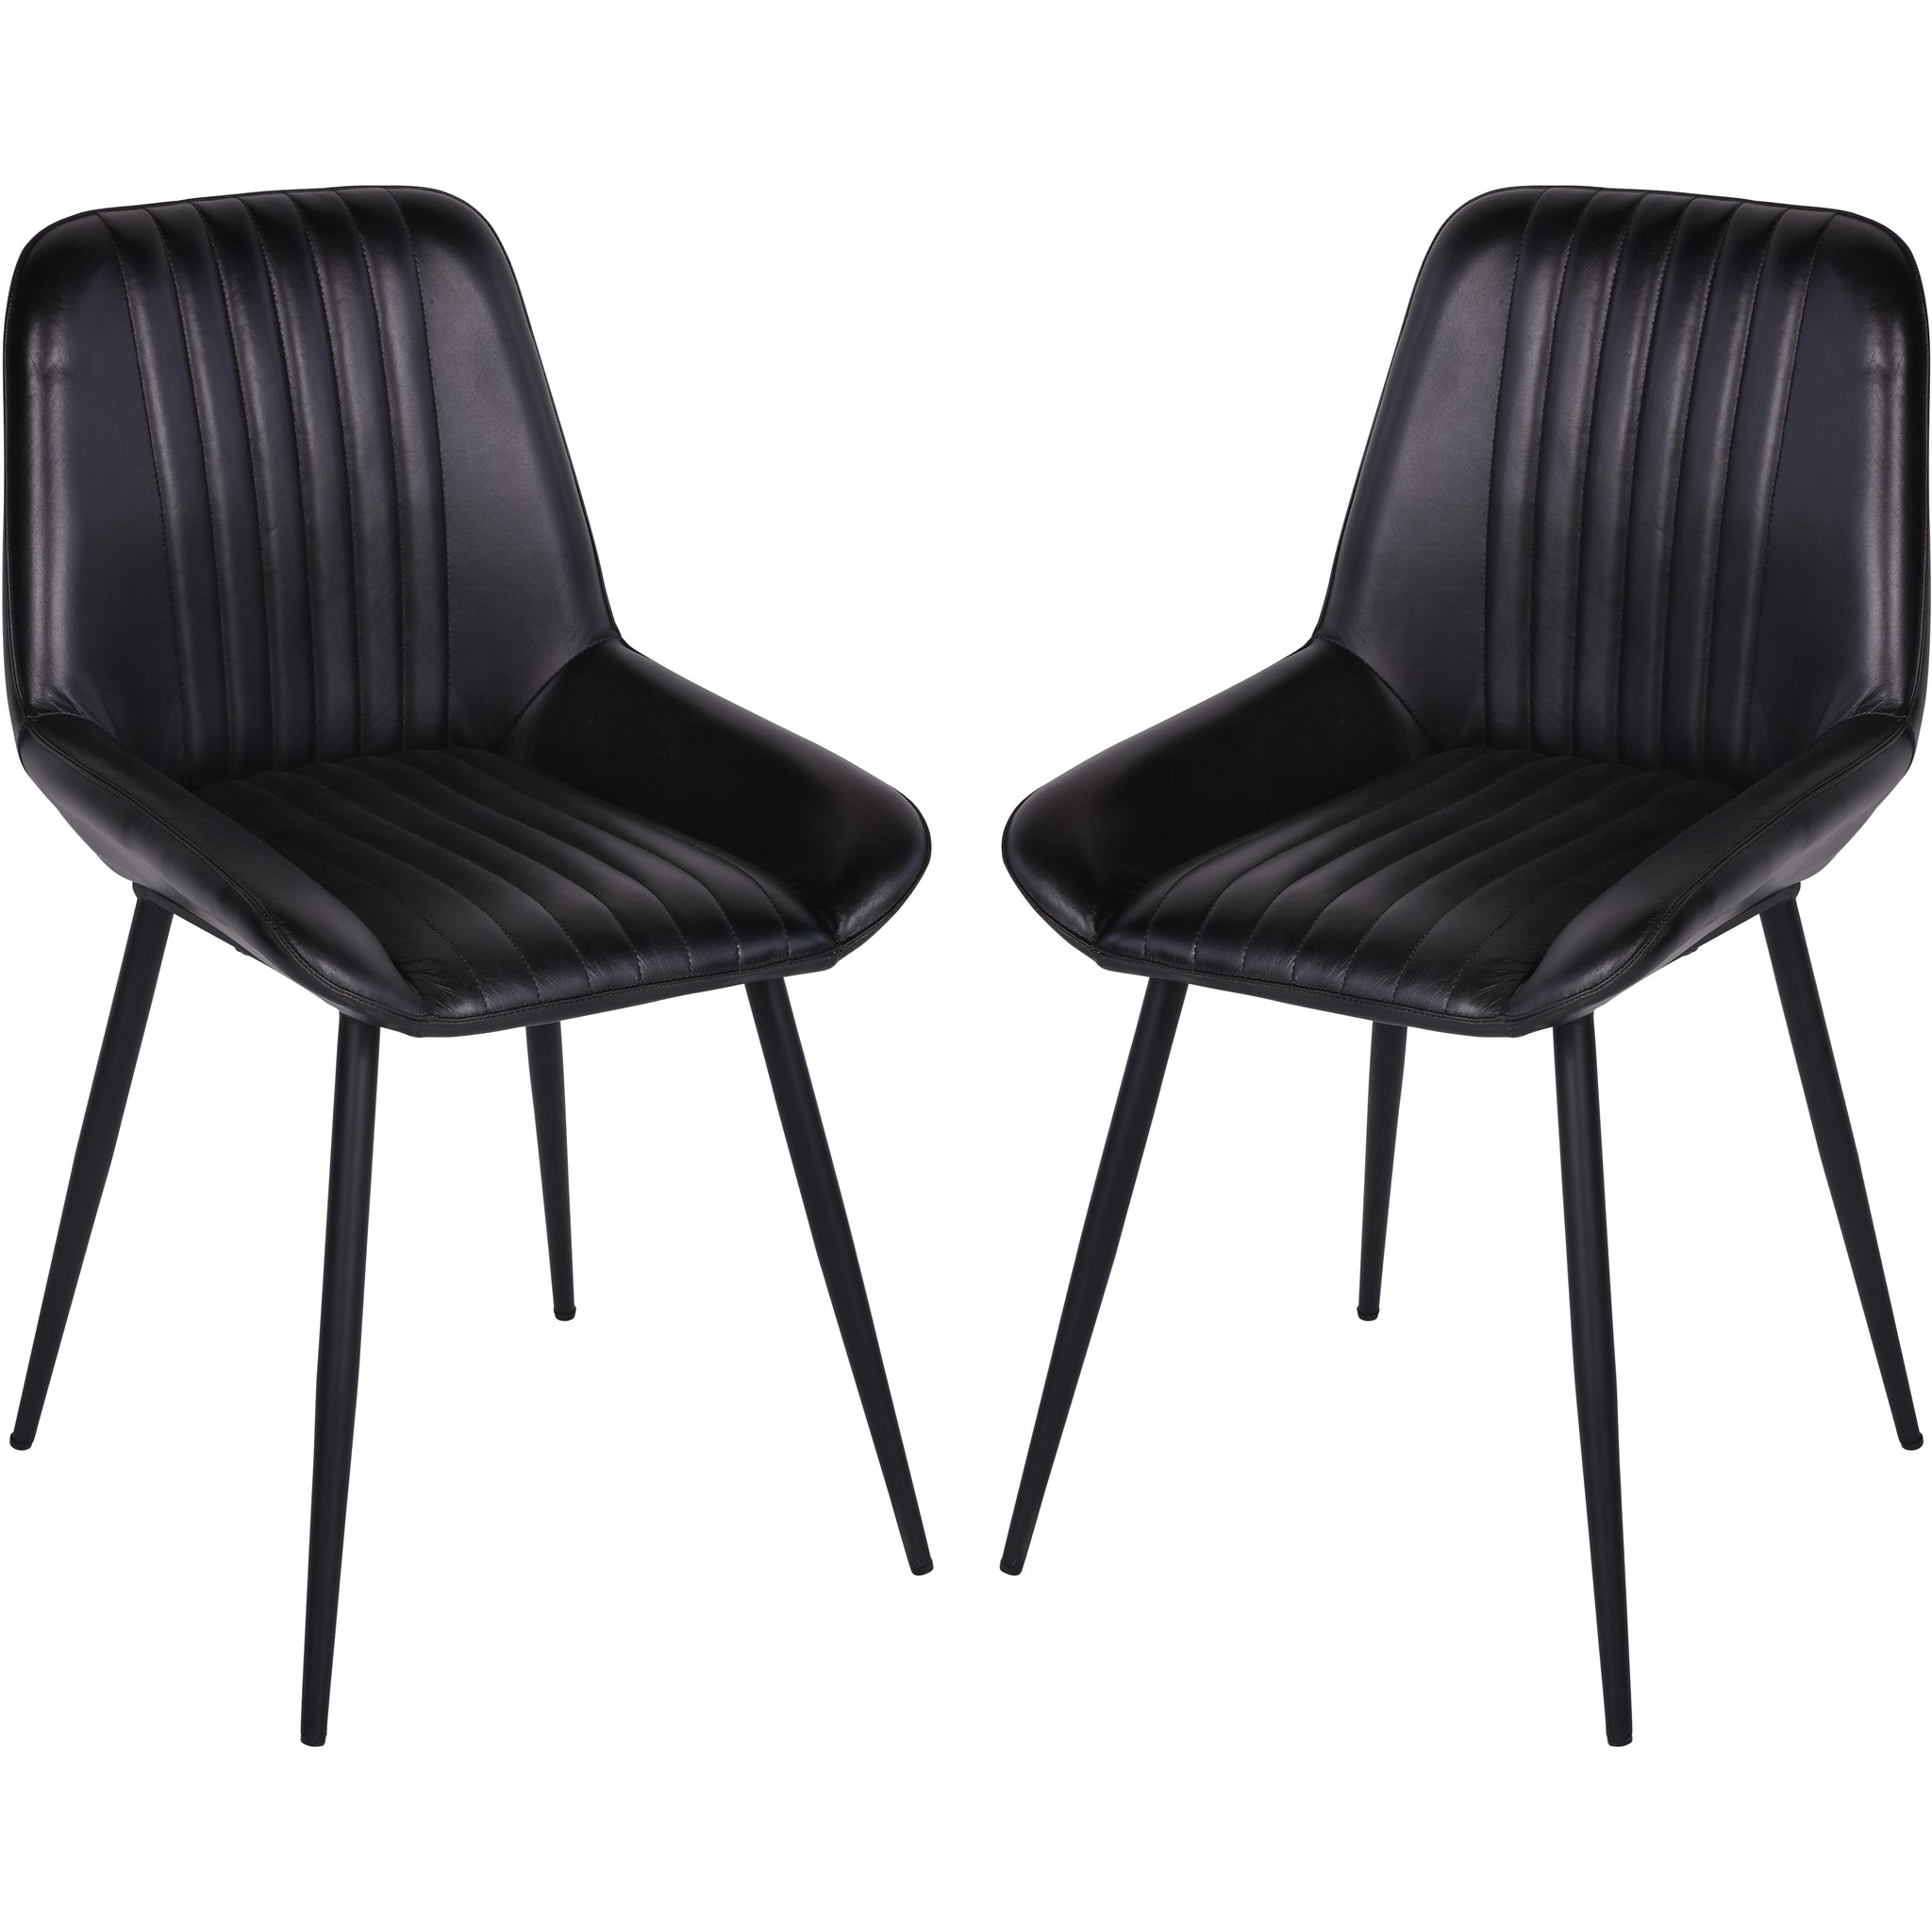 Set of 2 Boston Leather Dining Chairs in Charcoal